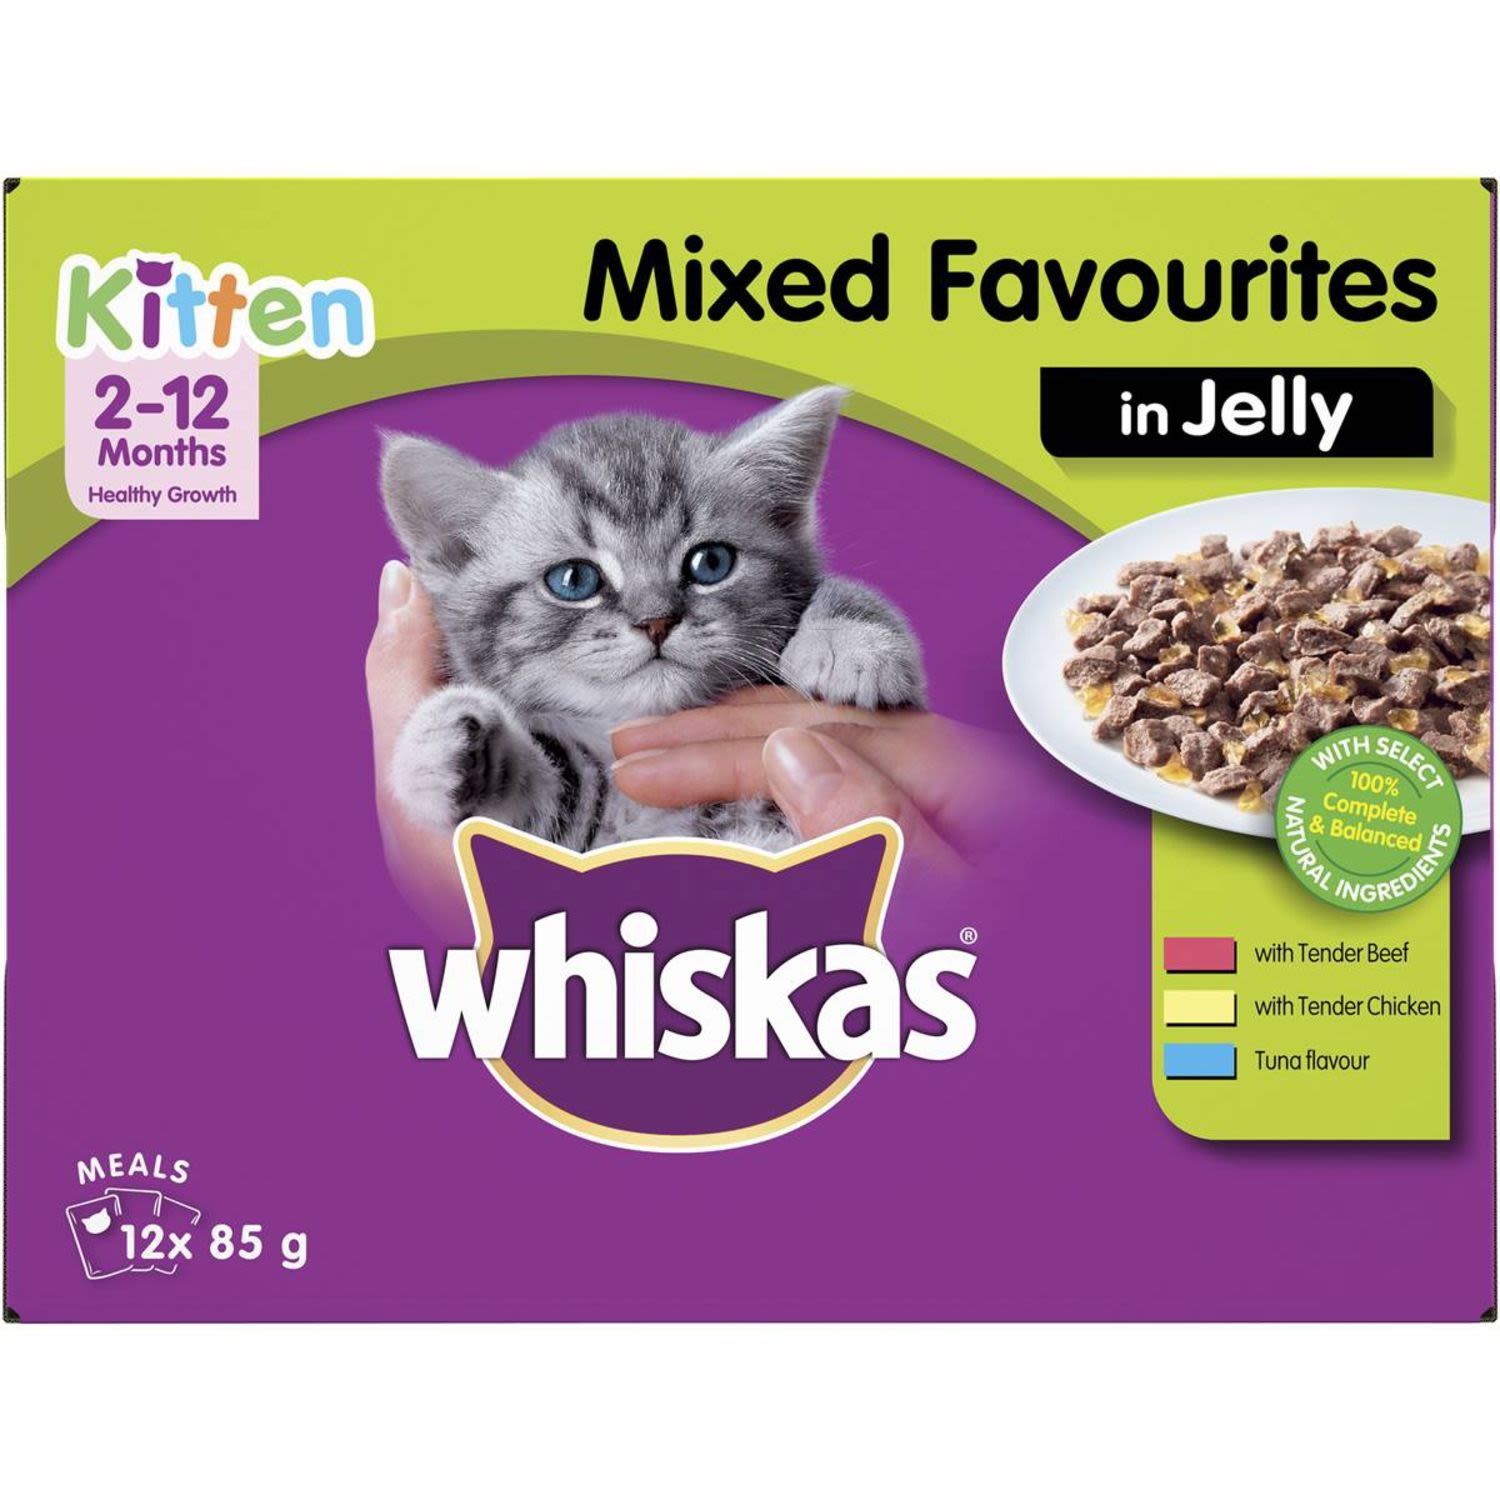 Whiskas Kitten Mixed Favourites In Jelly 2-12 Months, 12 Each